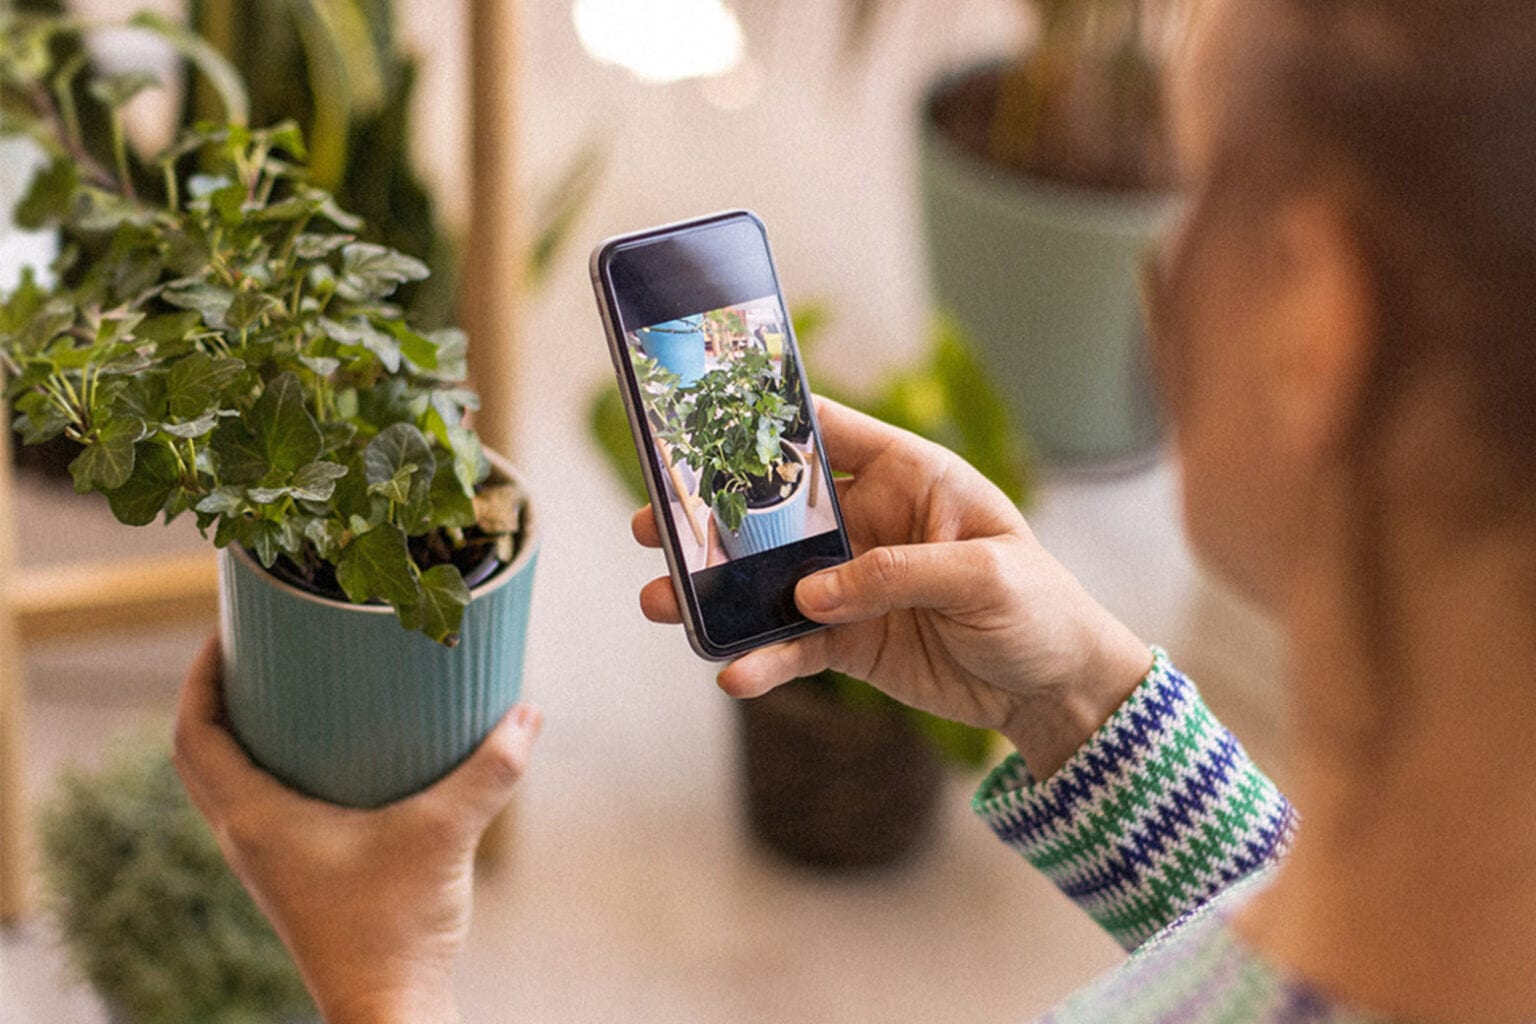 This $20 app can identify over 14,000 plant species.